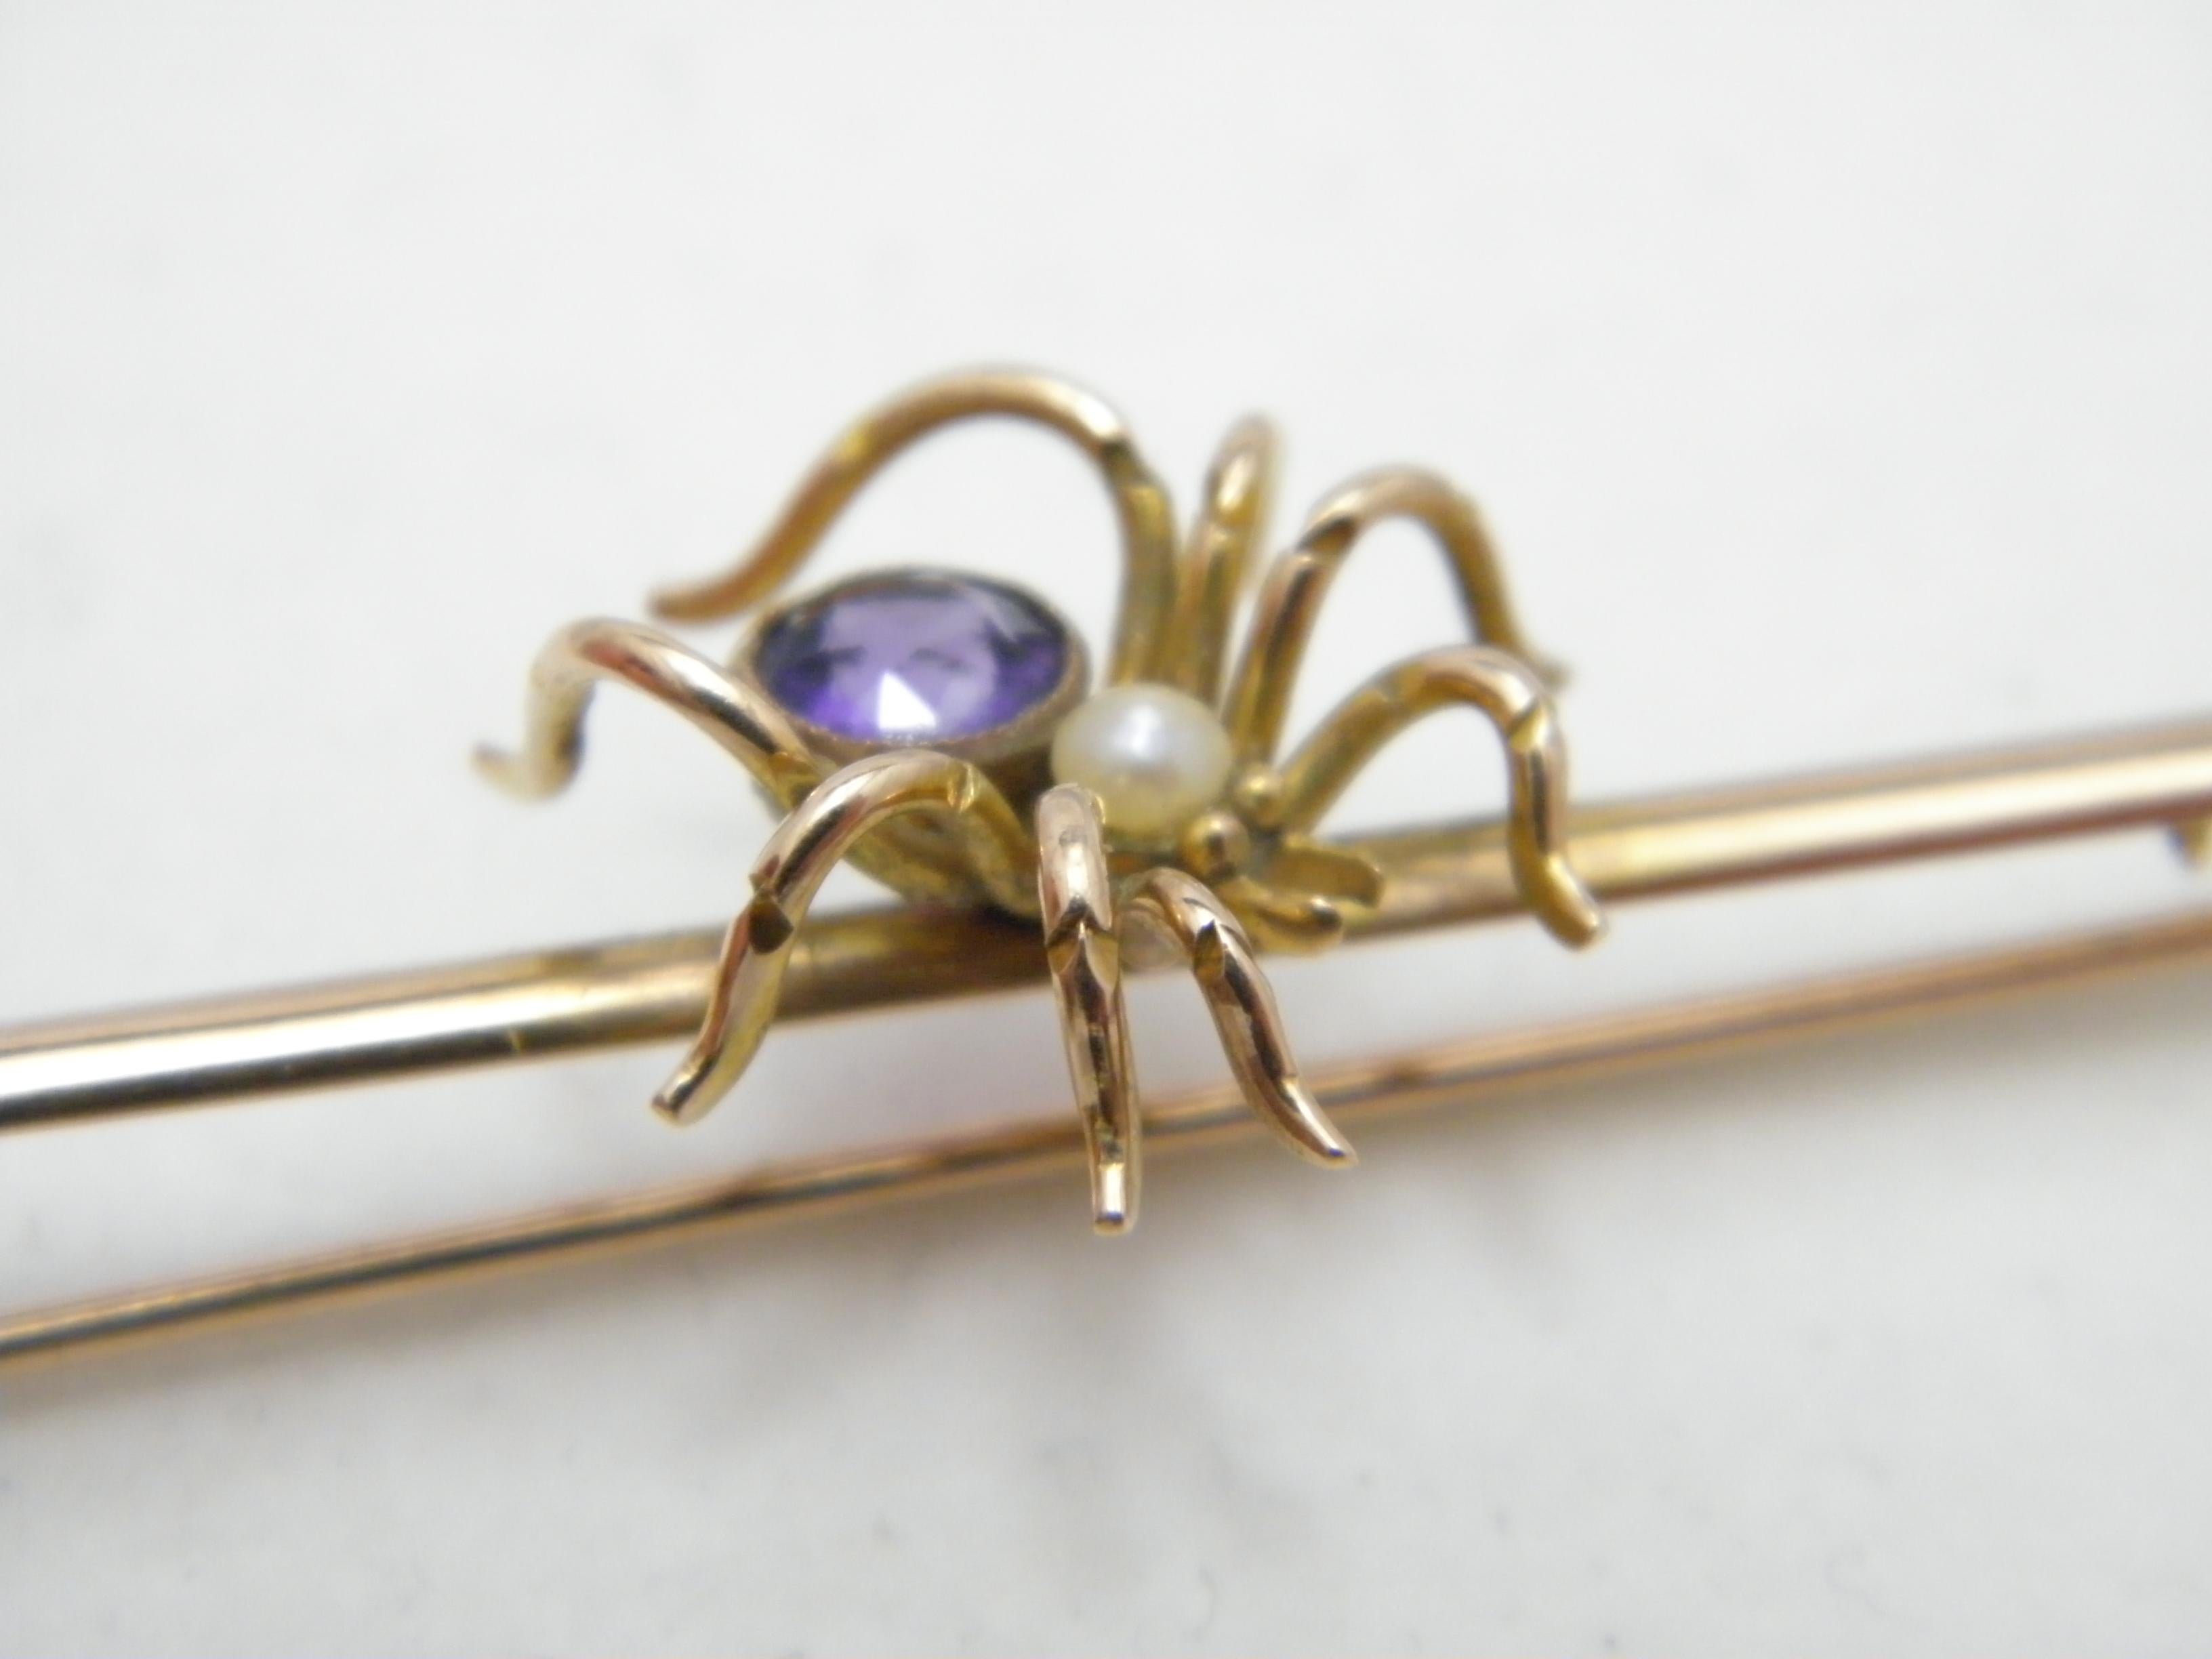 Women's or Men's Antique 9ct Gold Large Amethyst Pearl Spider Bug Brooch Pin c1860 Heavy 6.4g 375 For Sale